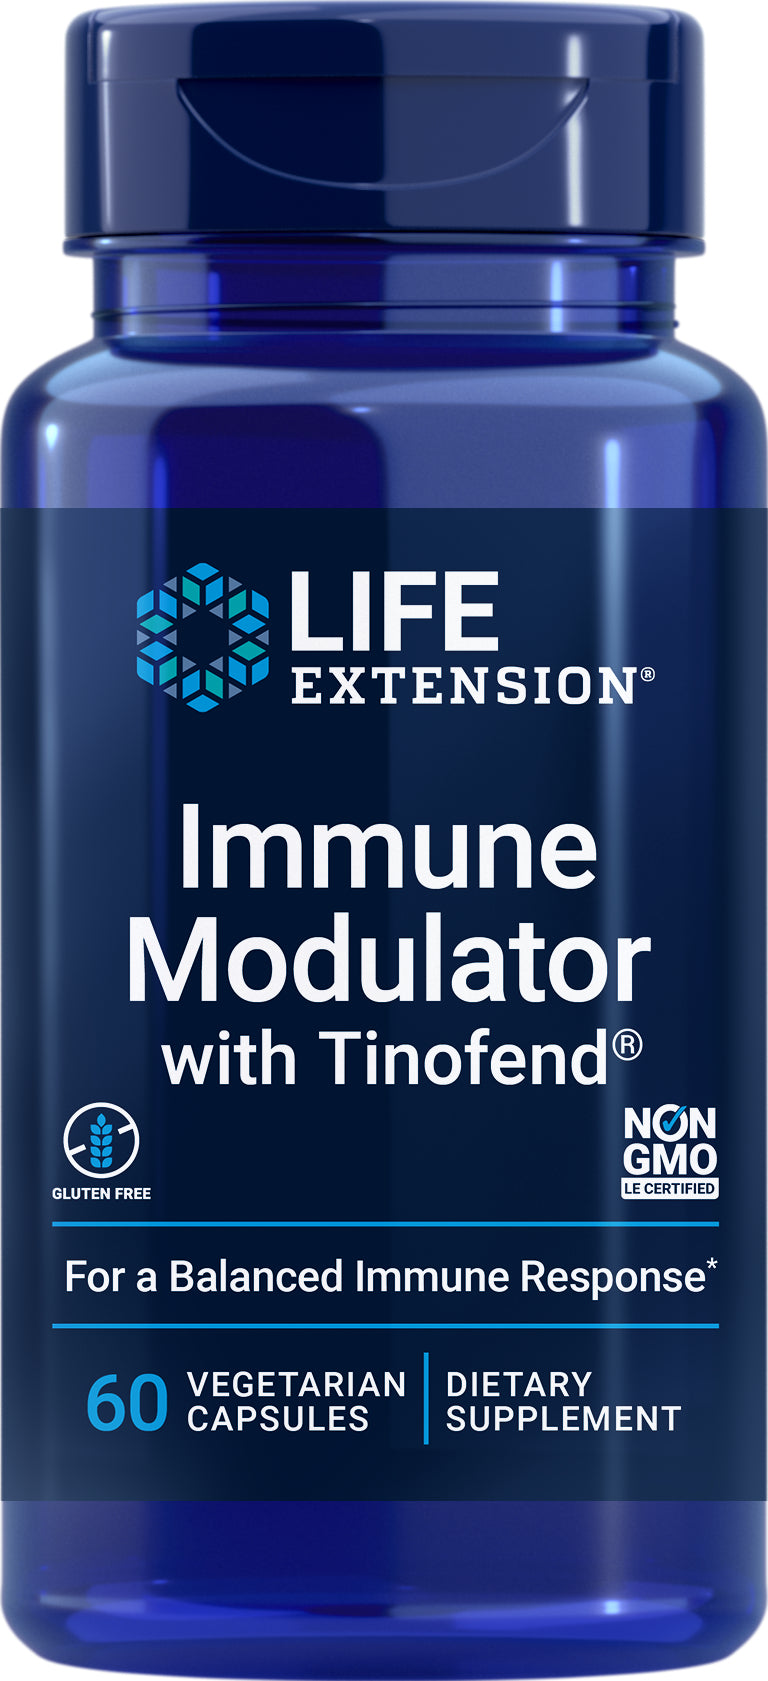 Immune Modulator with Tinofend® 60 vegetarian capsules by Life Extension